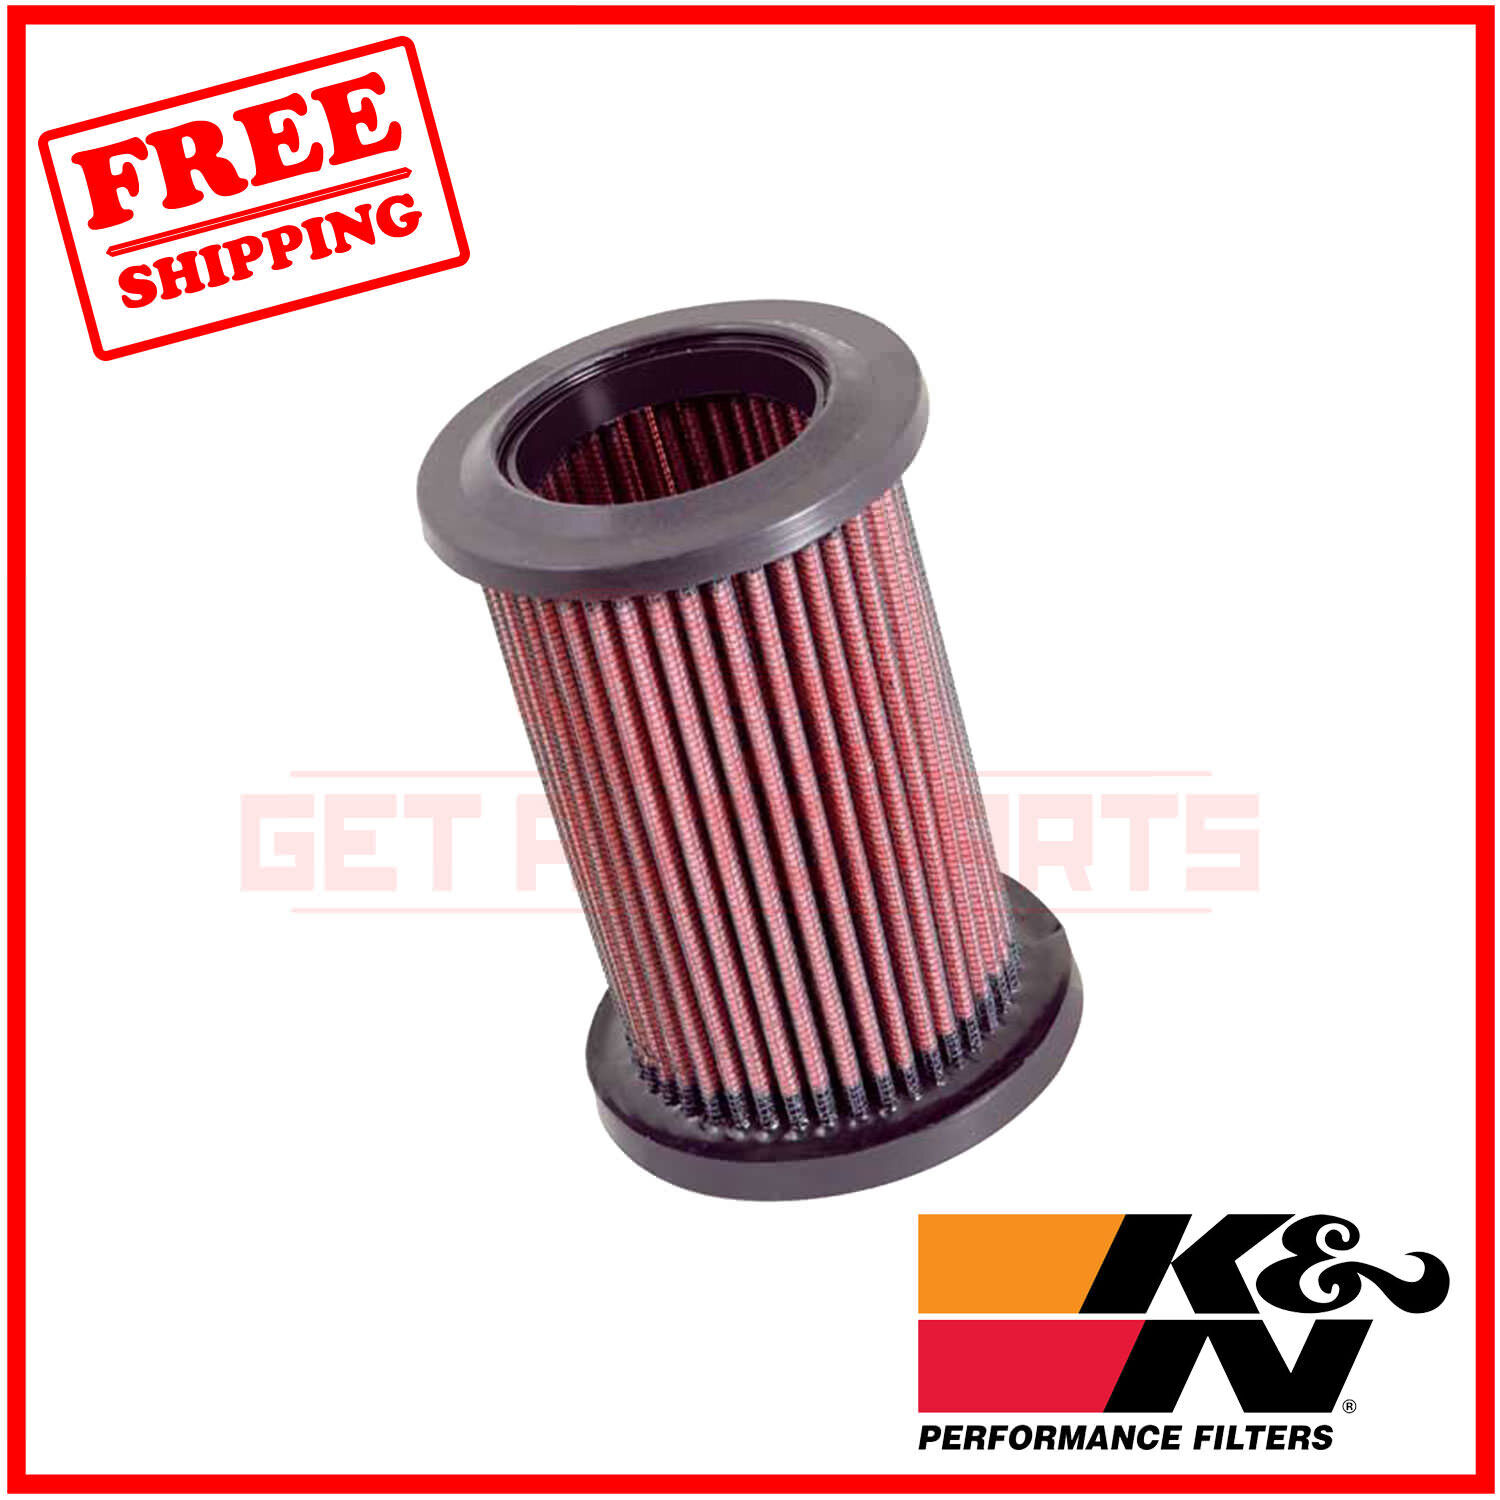 K&N Replacement Air Filter for Ducati Hypermotard 2013-2015